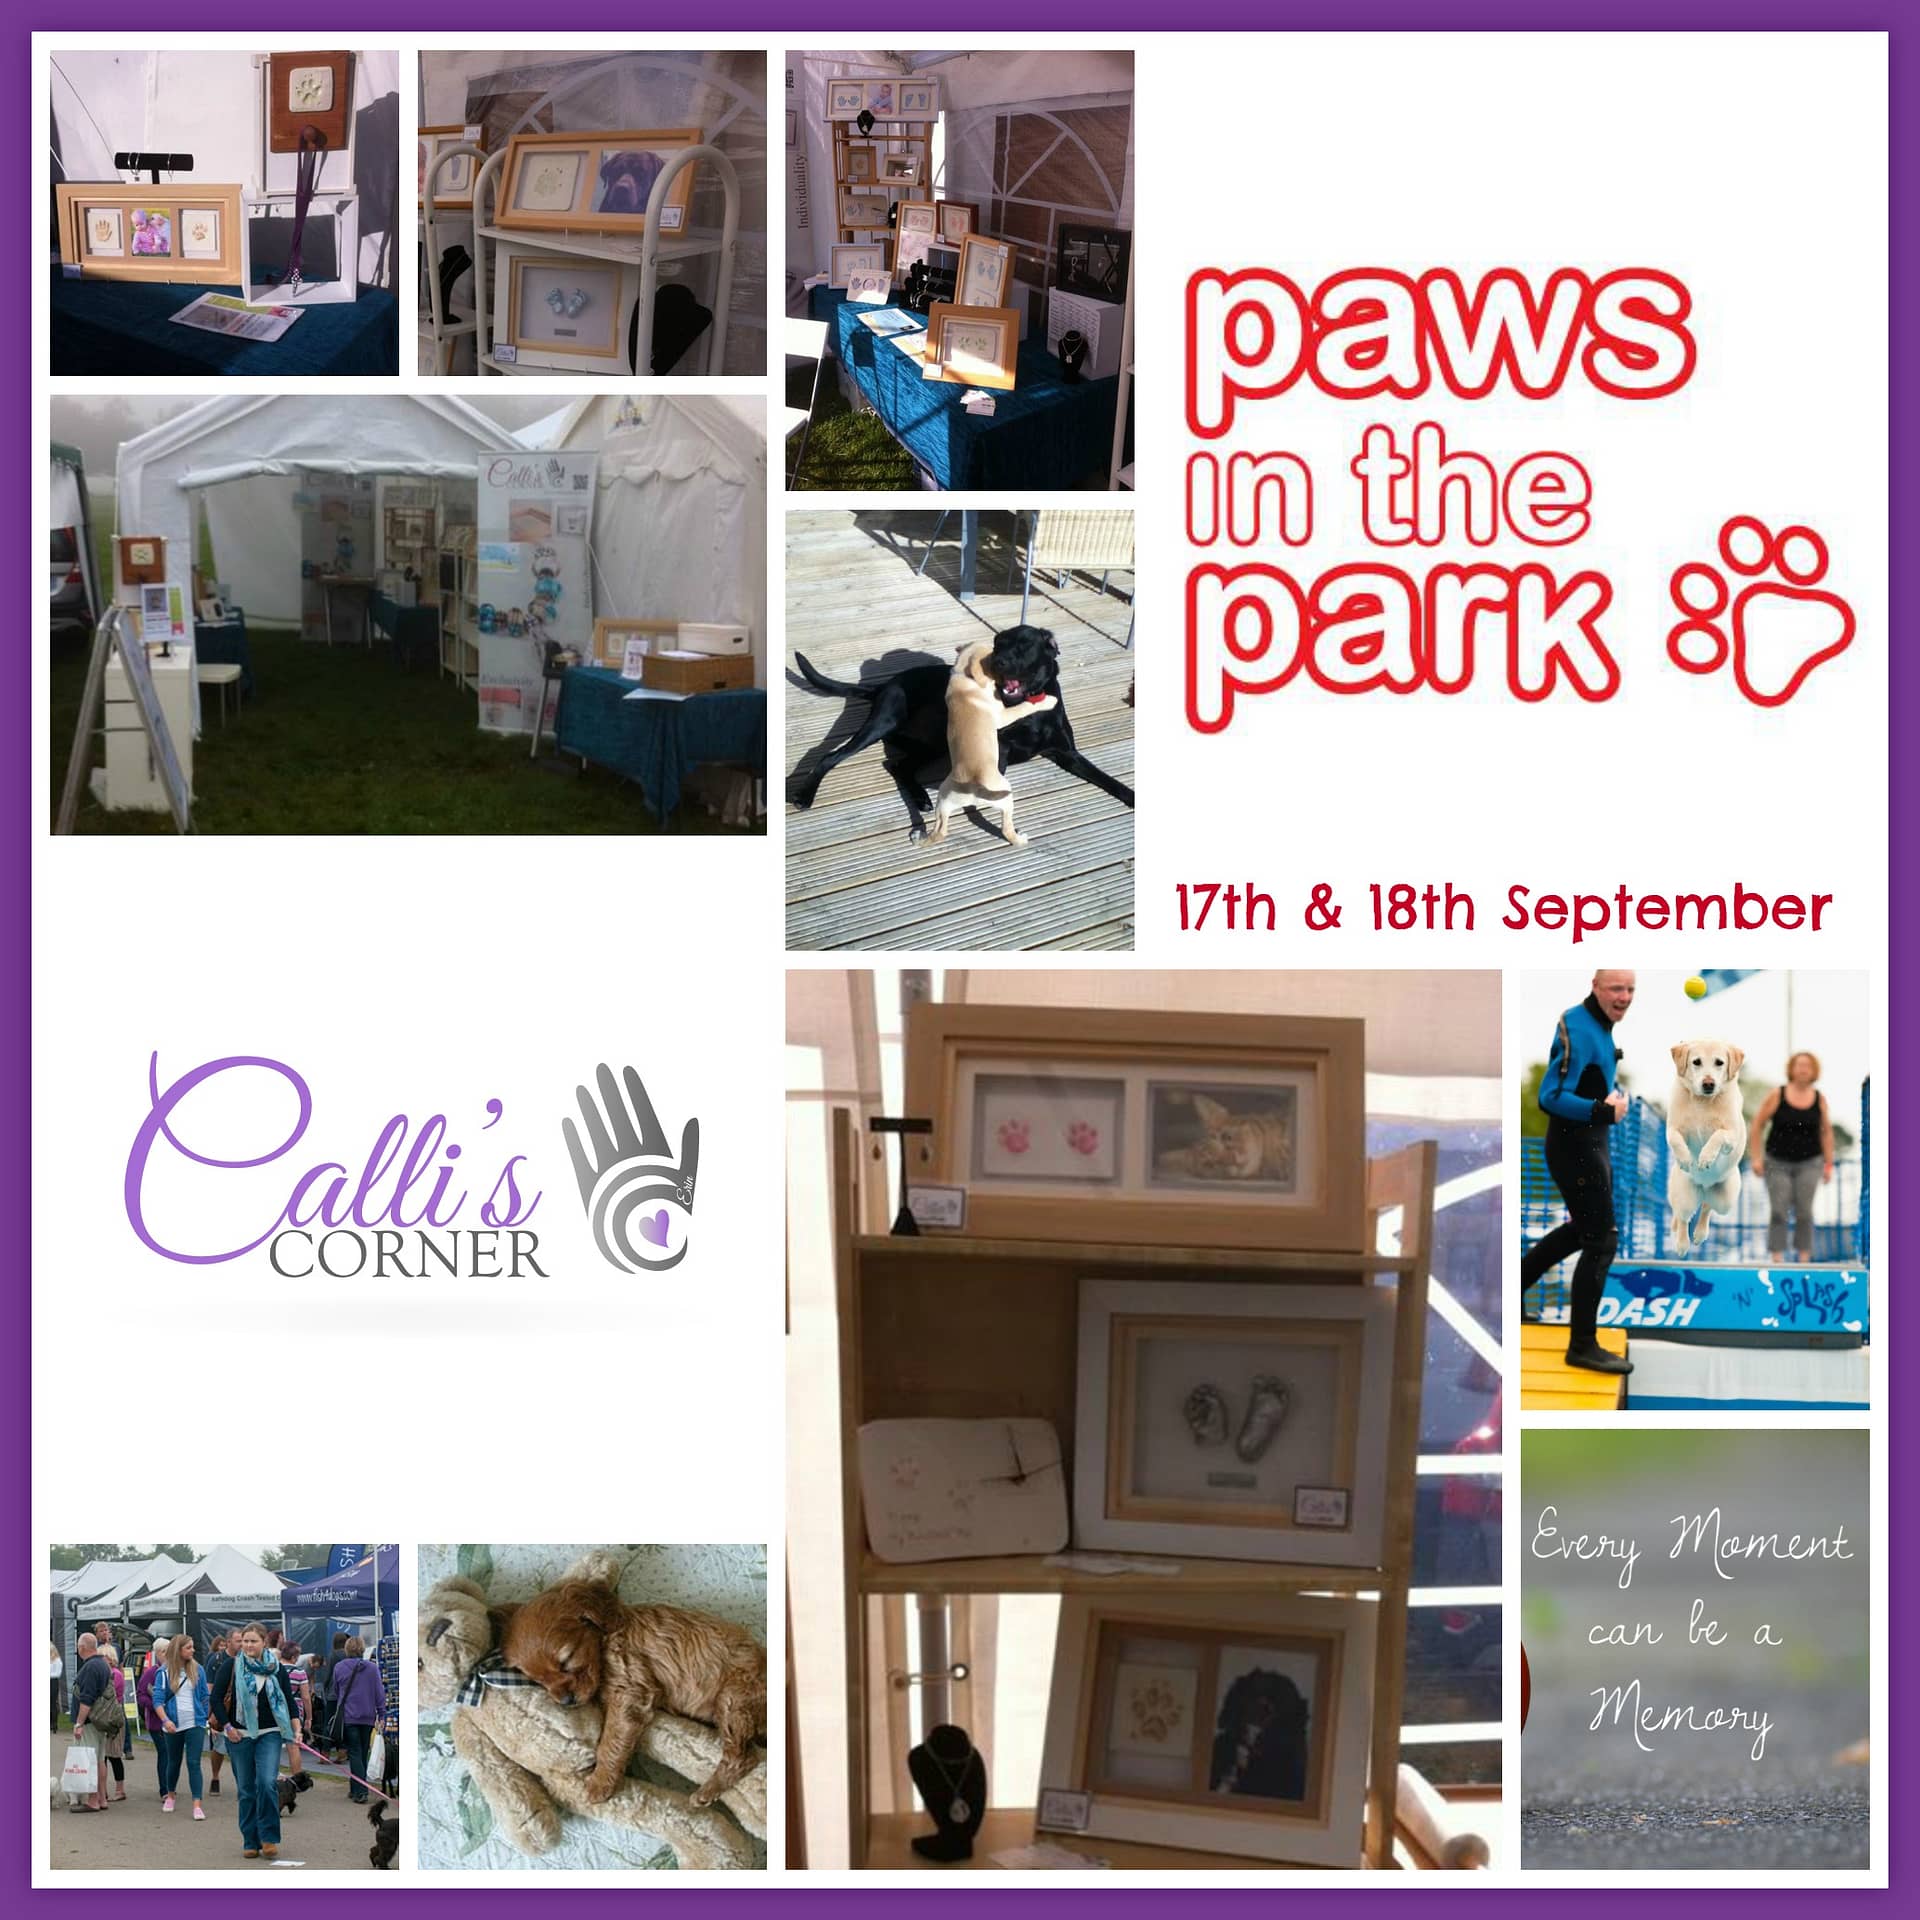 Calli’s Corner at Paws in the Park